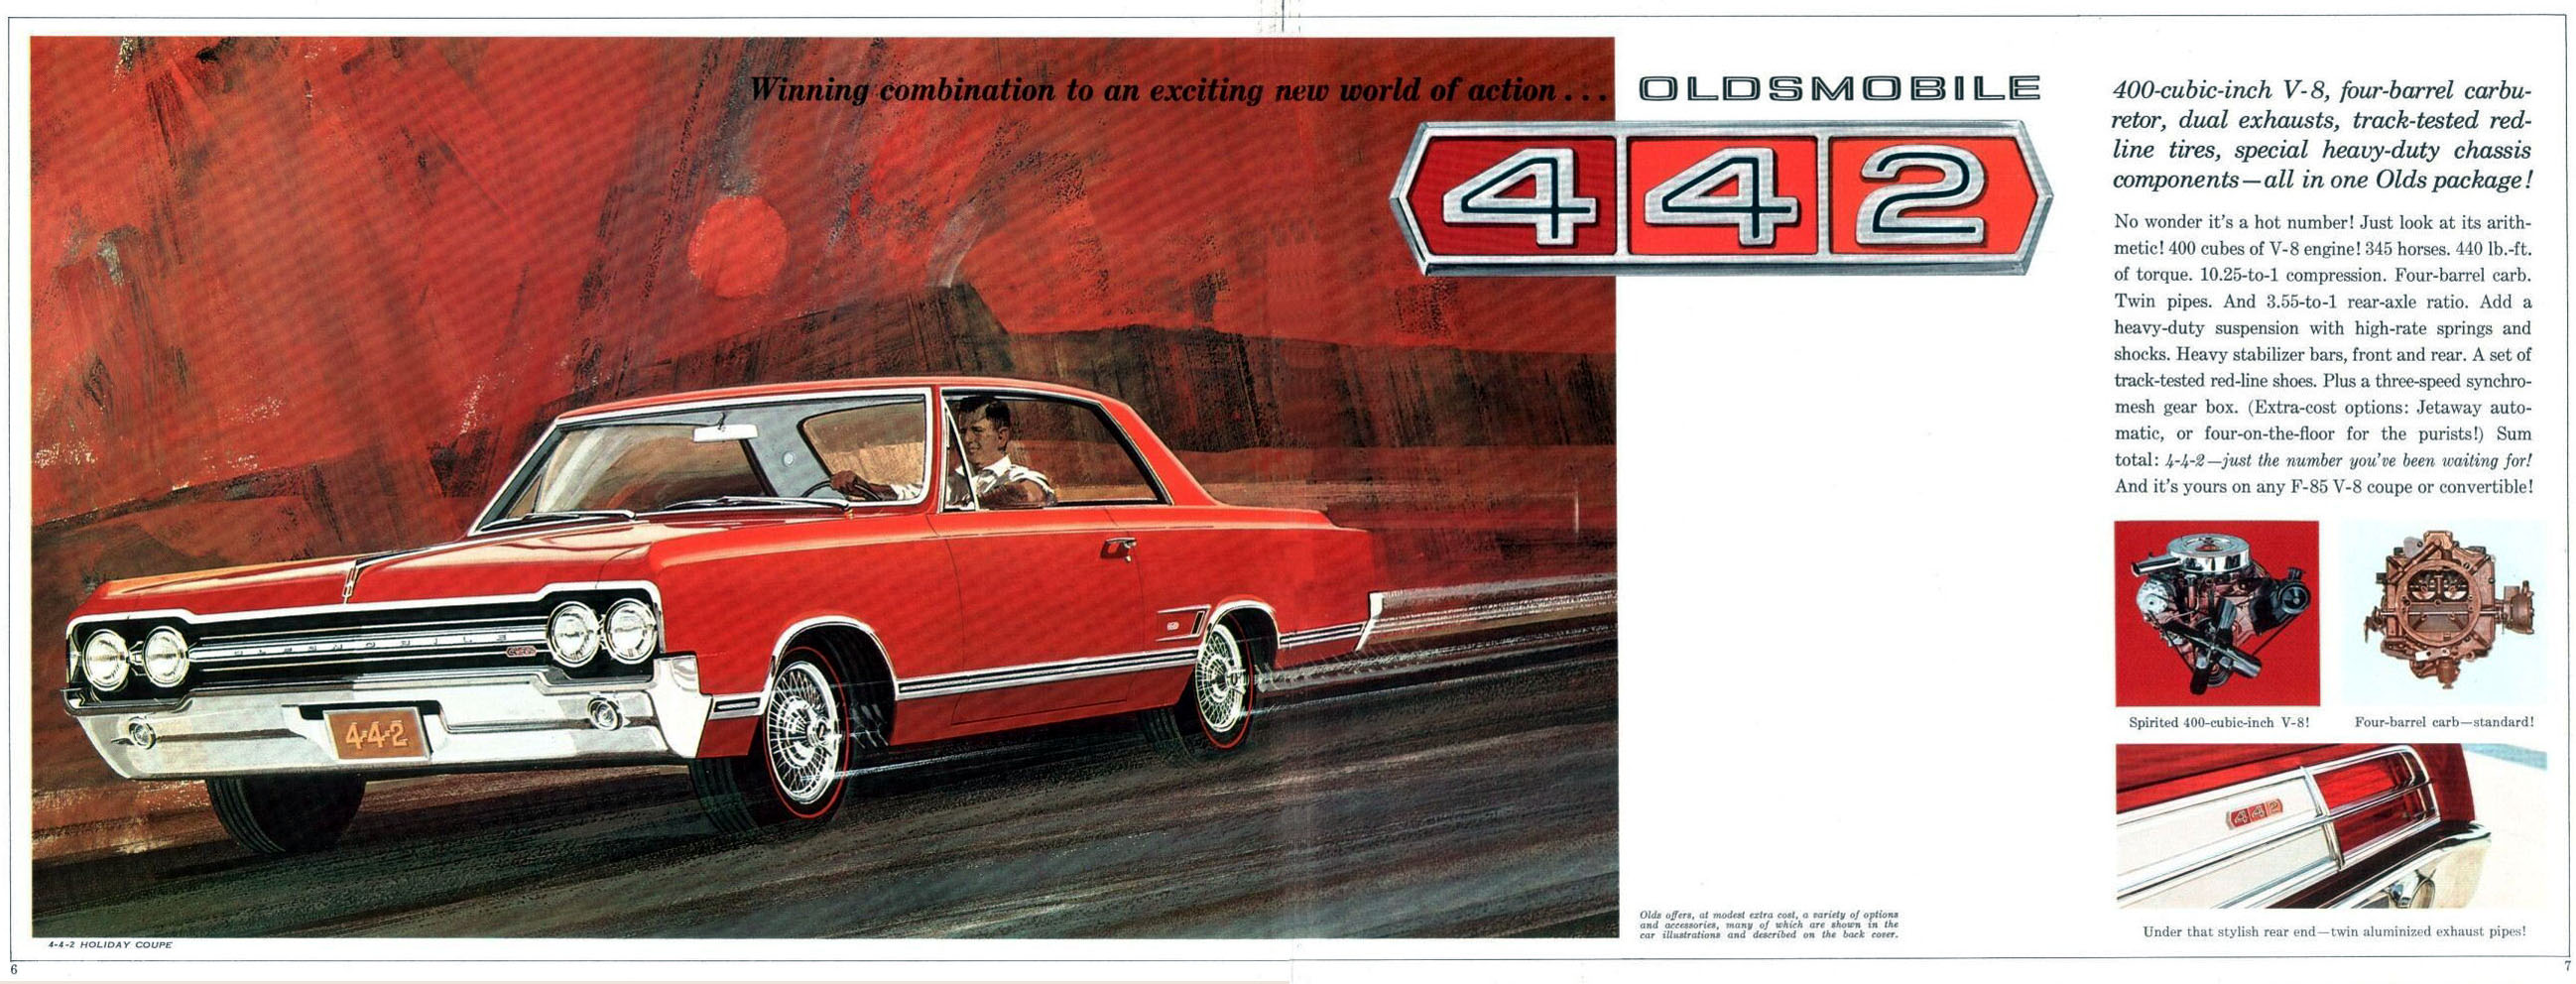 1965 Oldsmobile Sports Cars Brochure Page 1